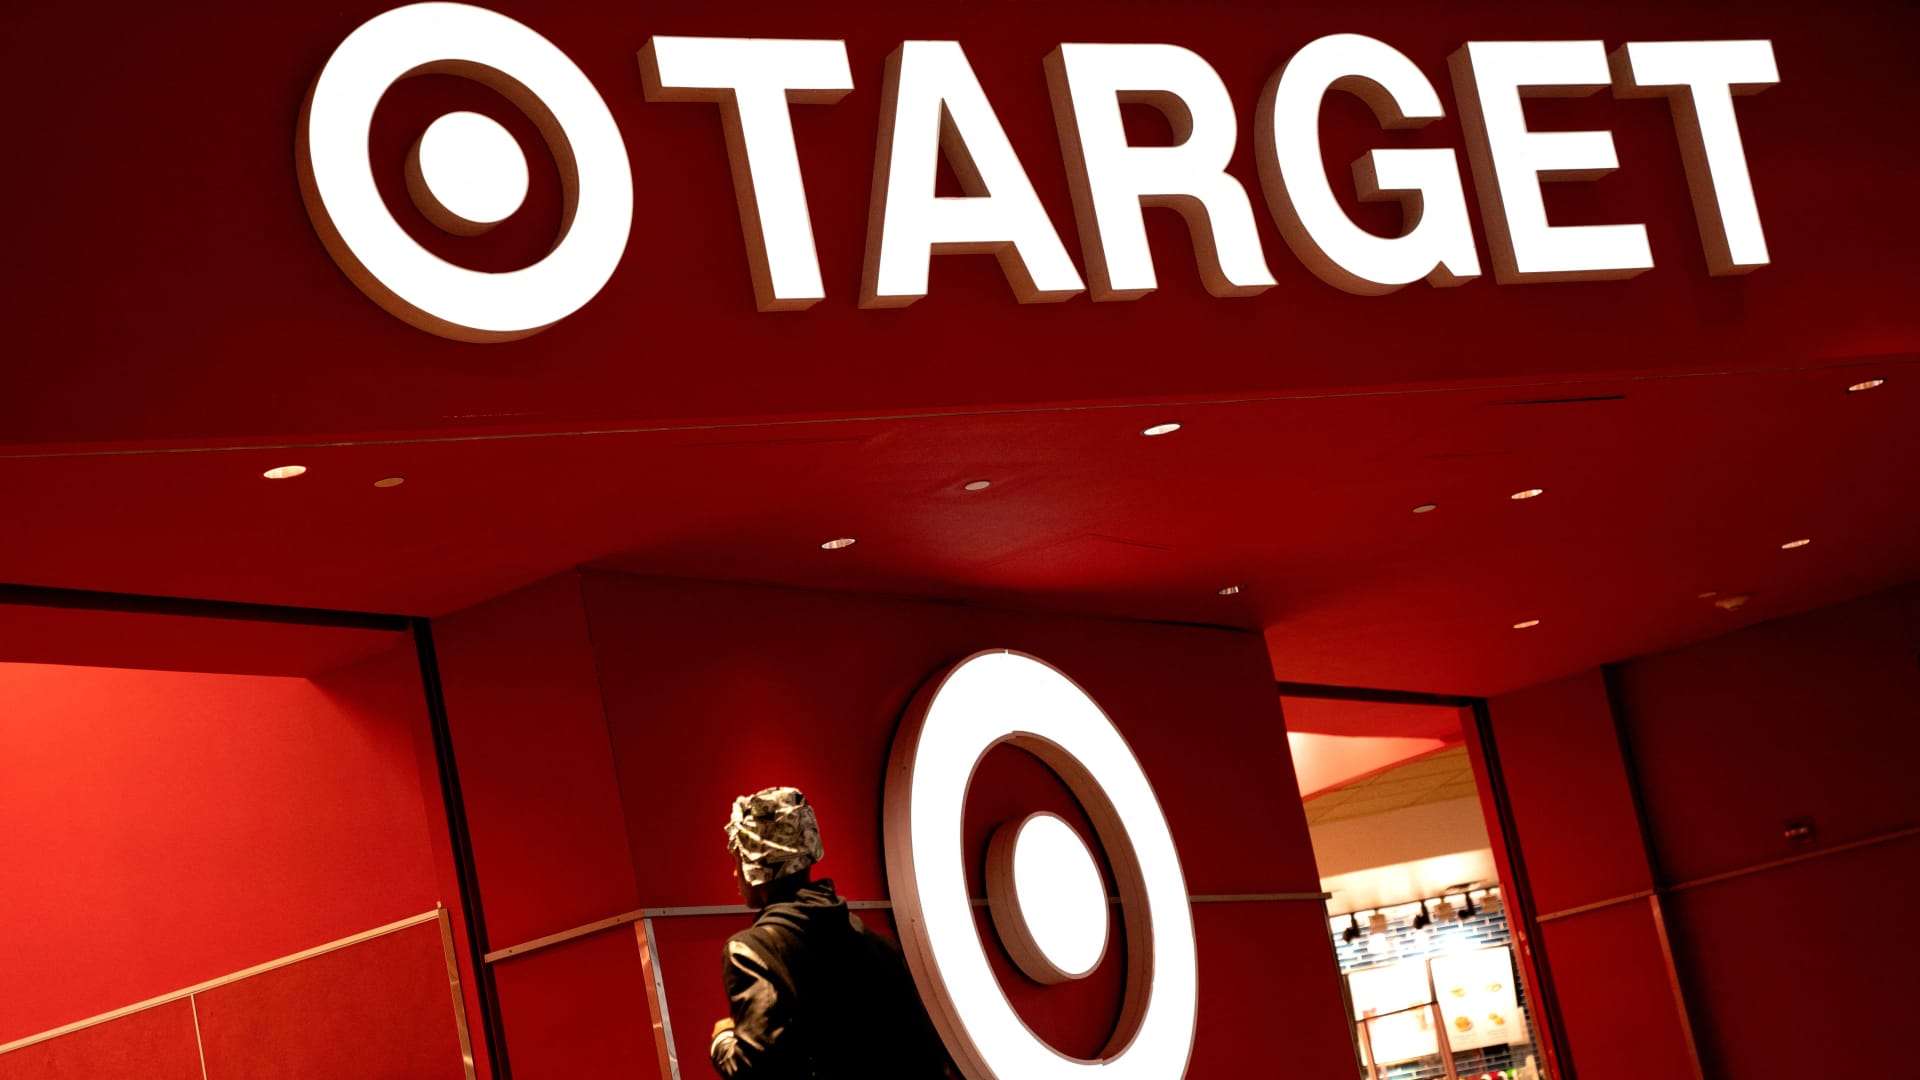 A person walks into a Target store in Washington, DC, on May 18, 2022.